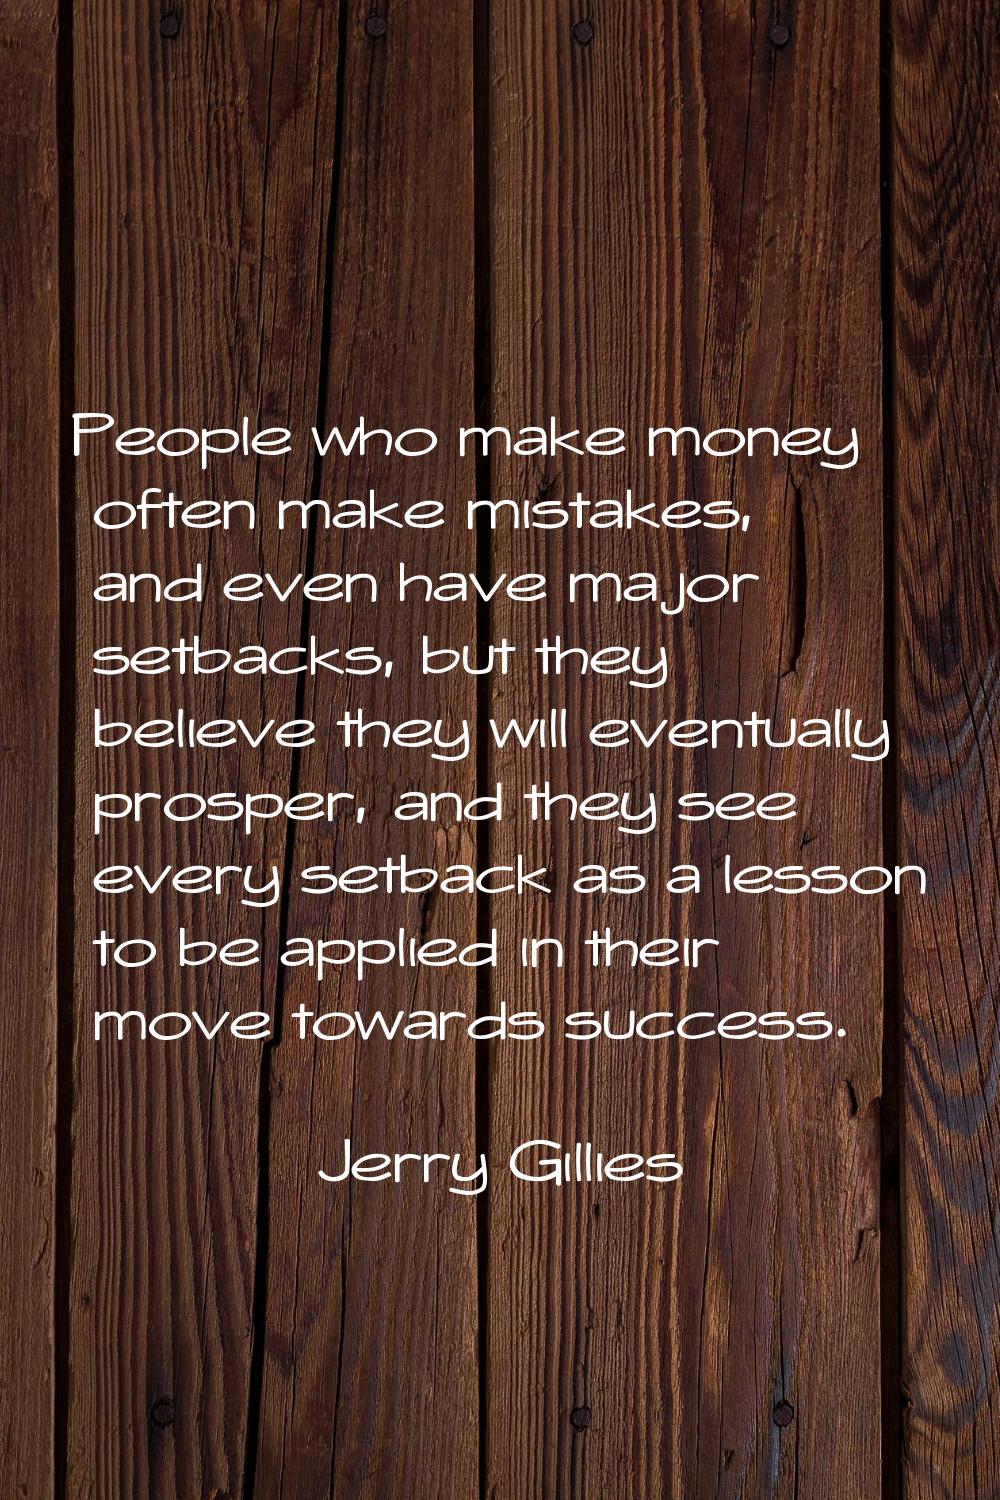 People who make money often make mistakes, and even have major setbacks, but they believe they will